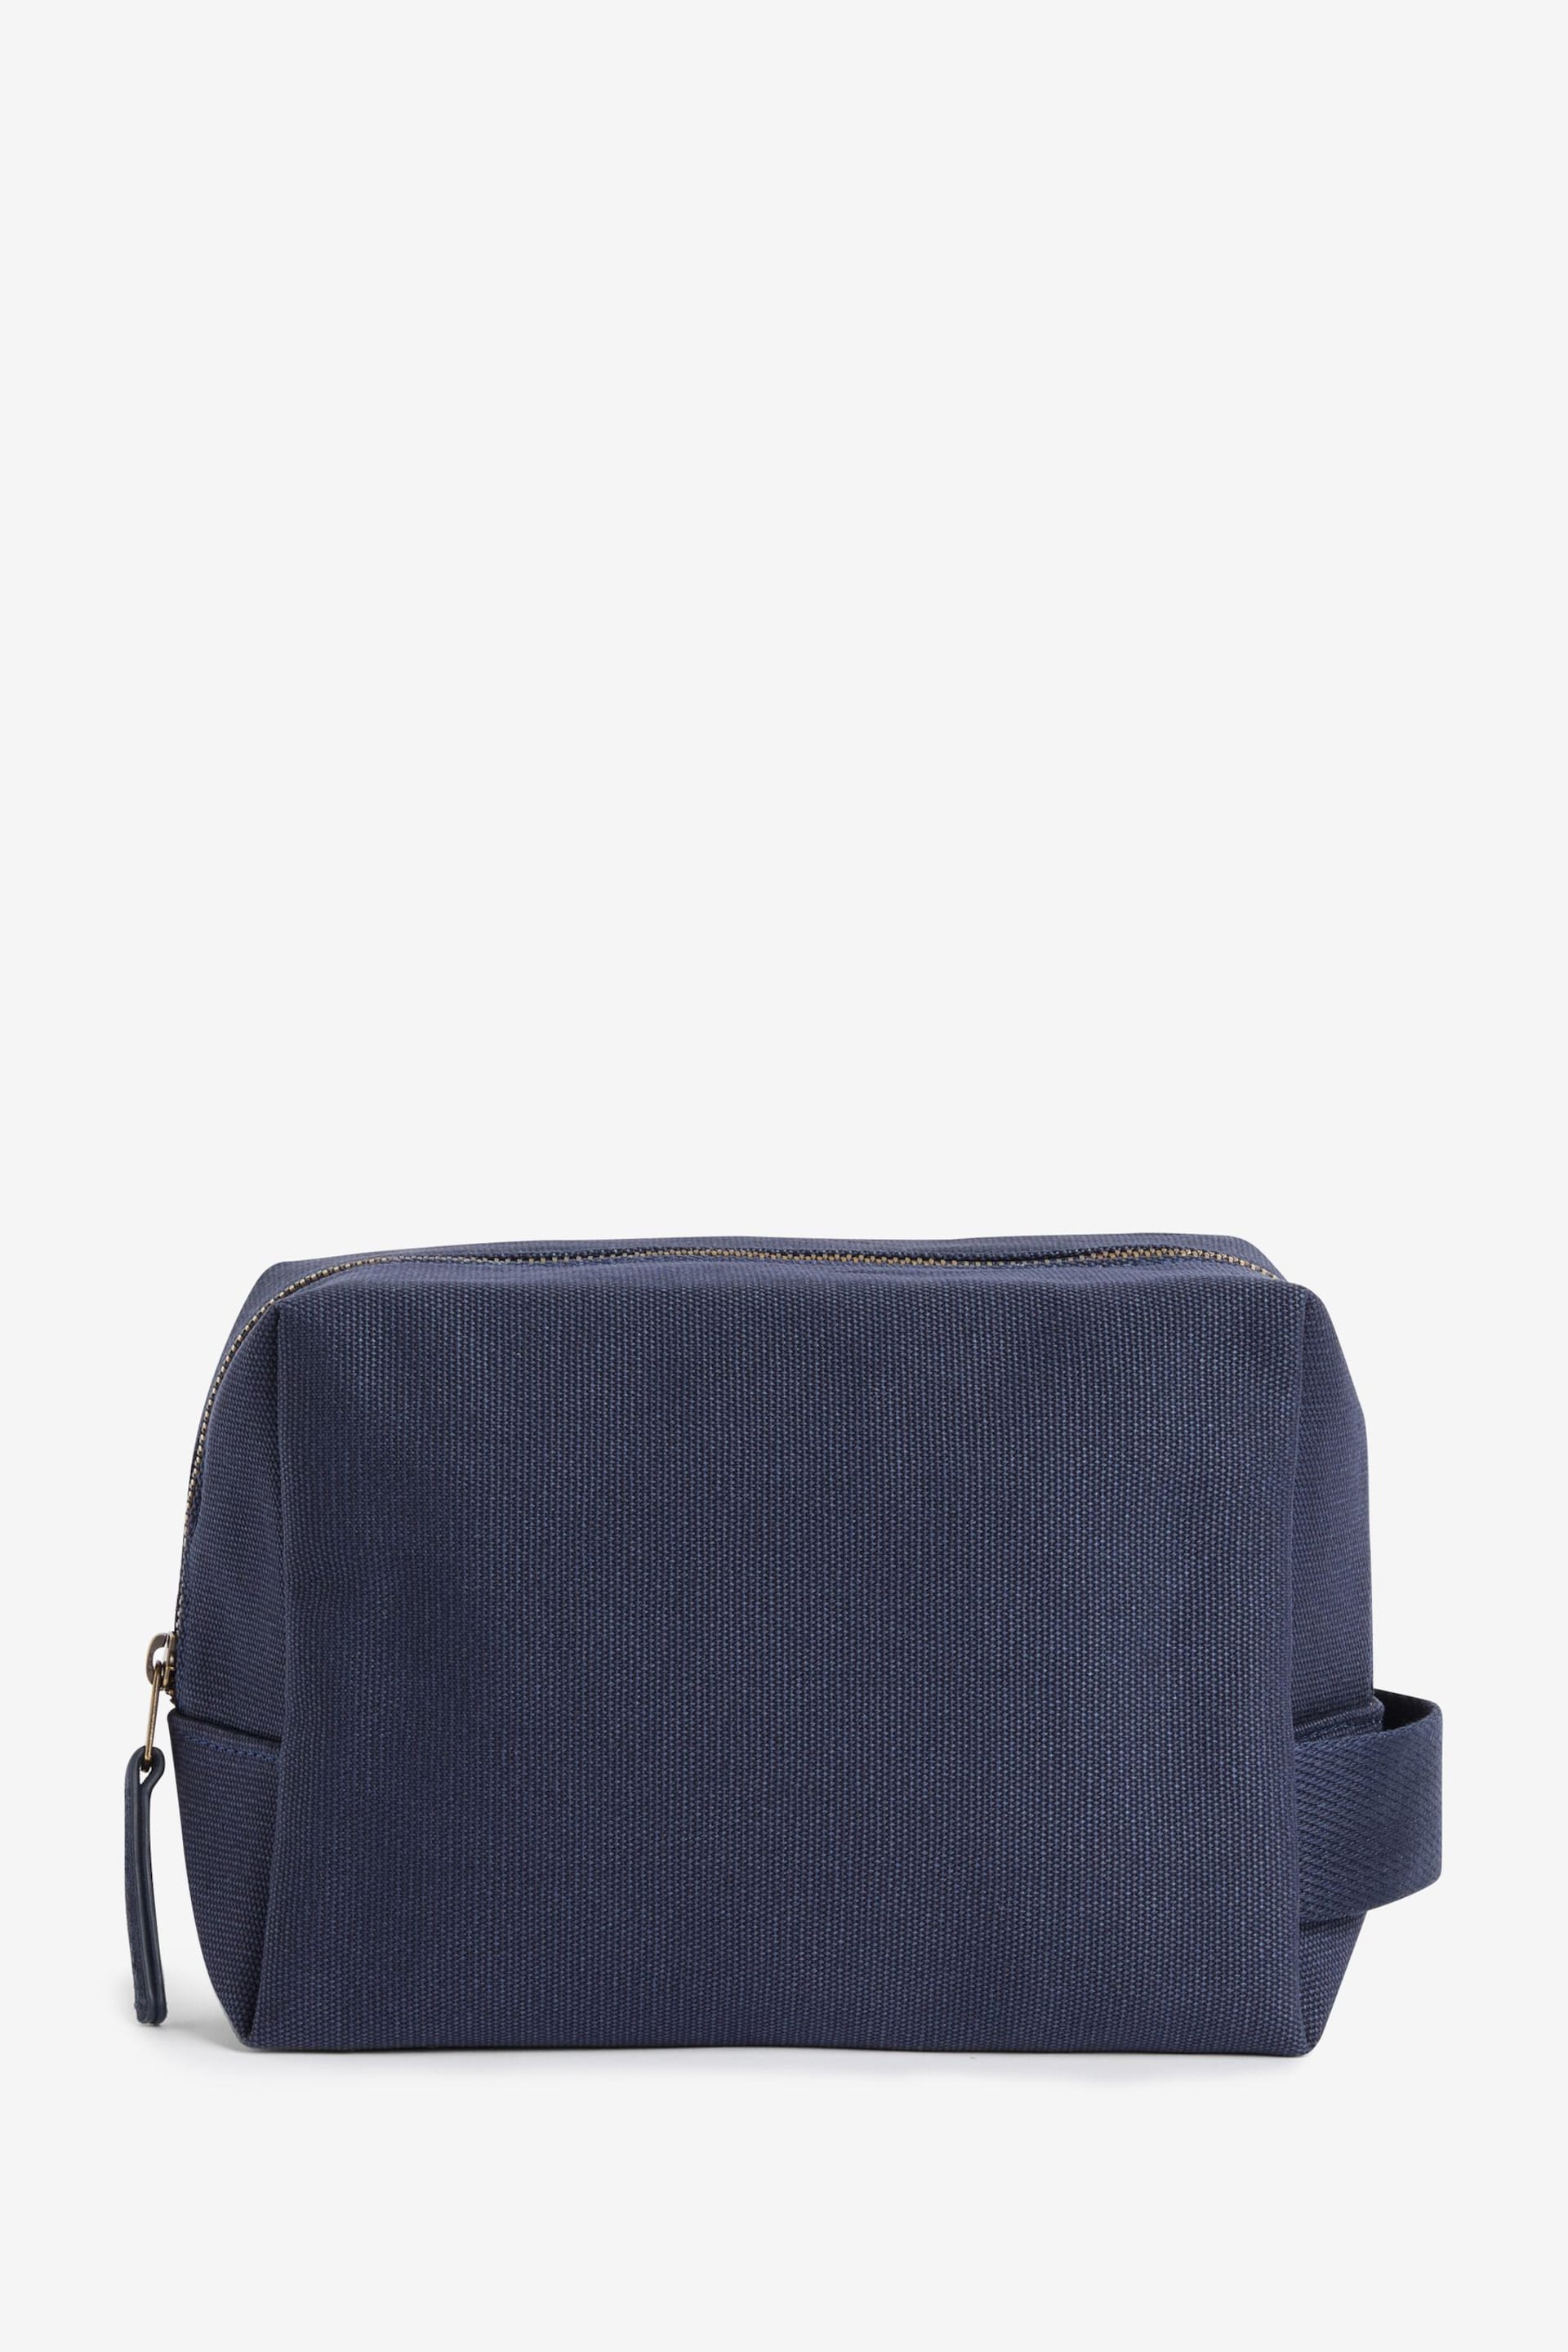 GANT Blue Archive Shield Toiletry Bag - Image 2 of 4